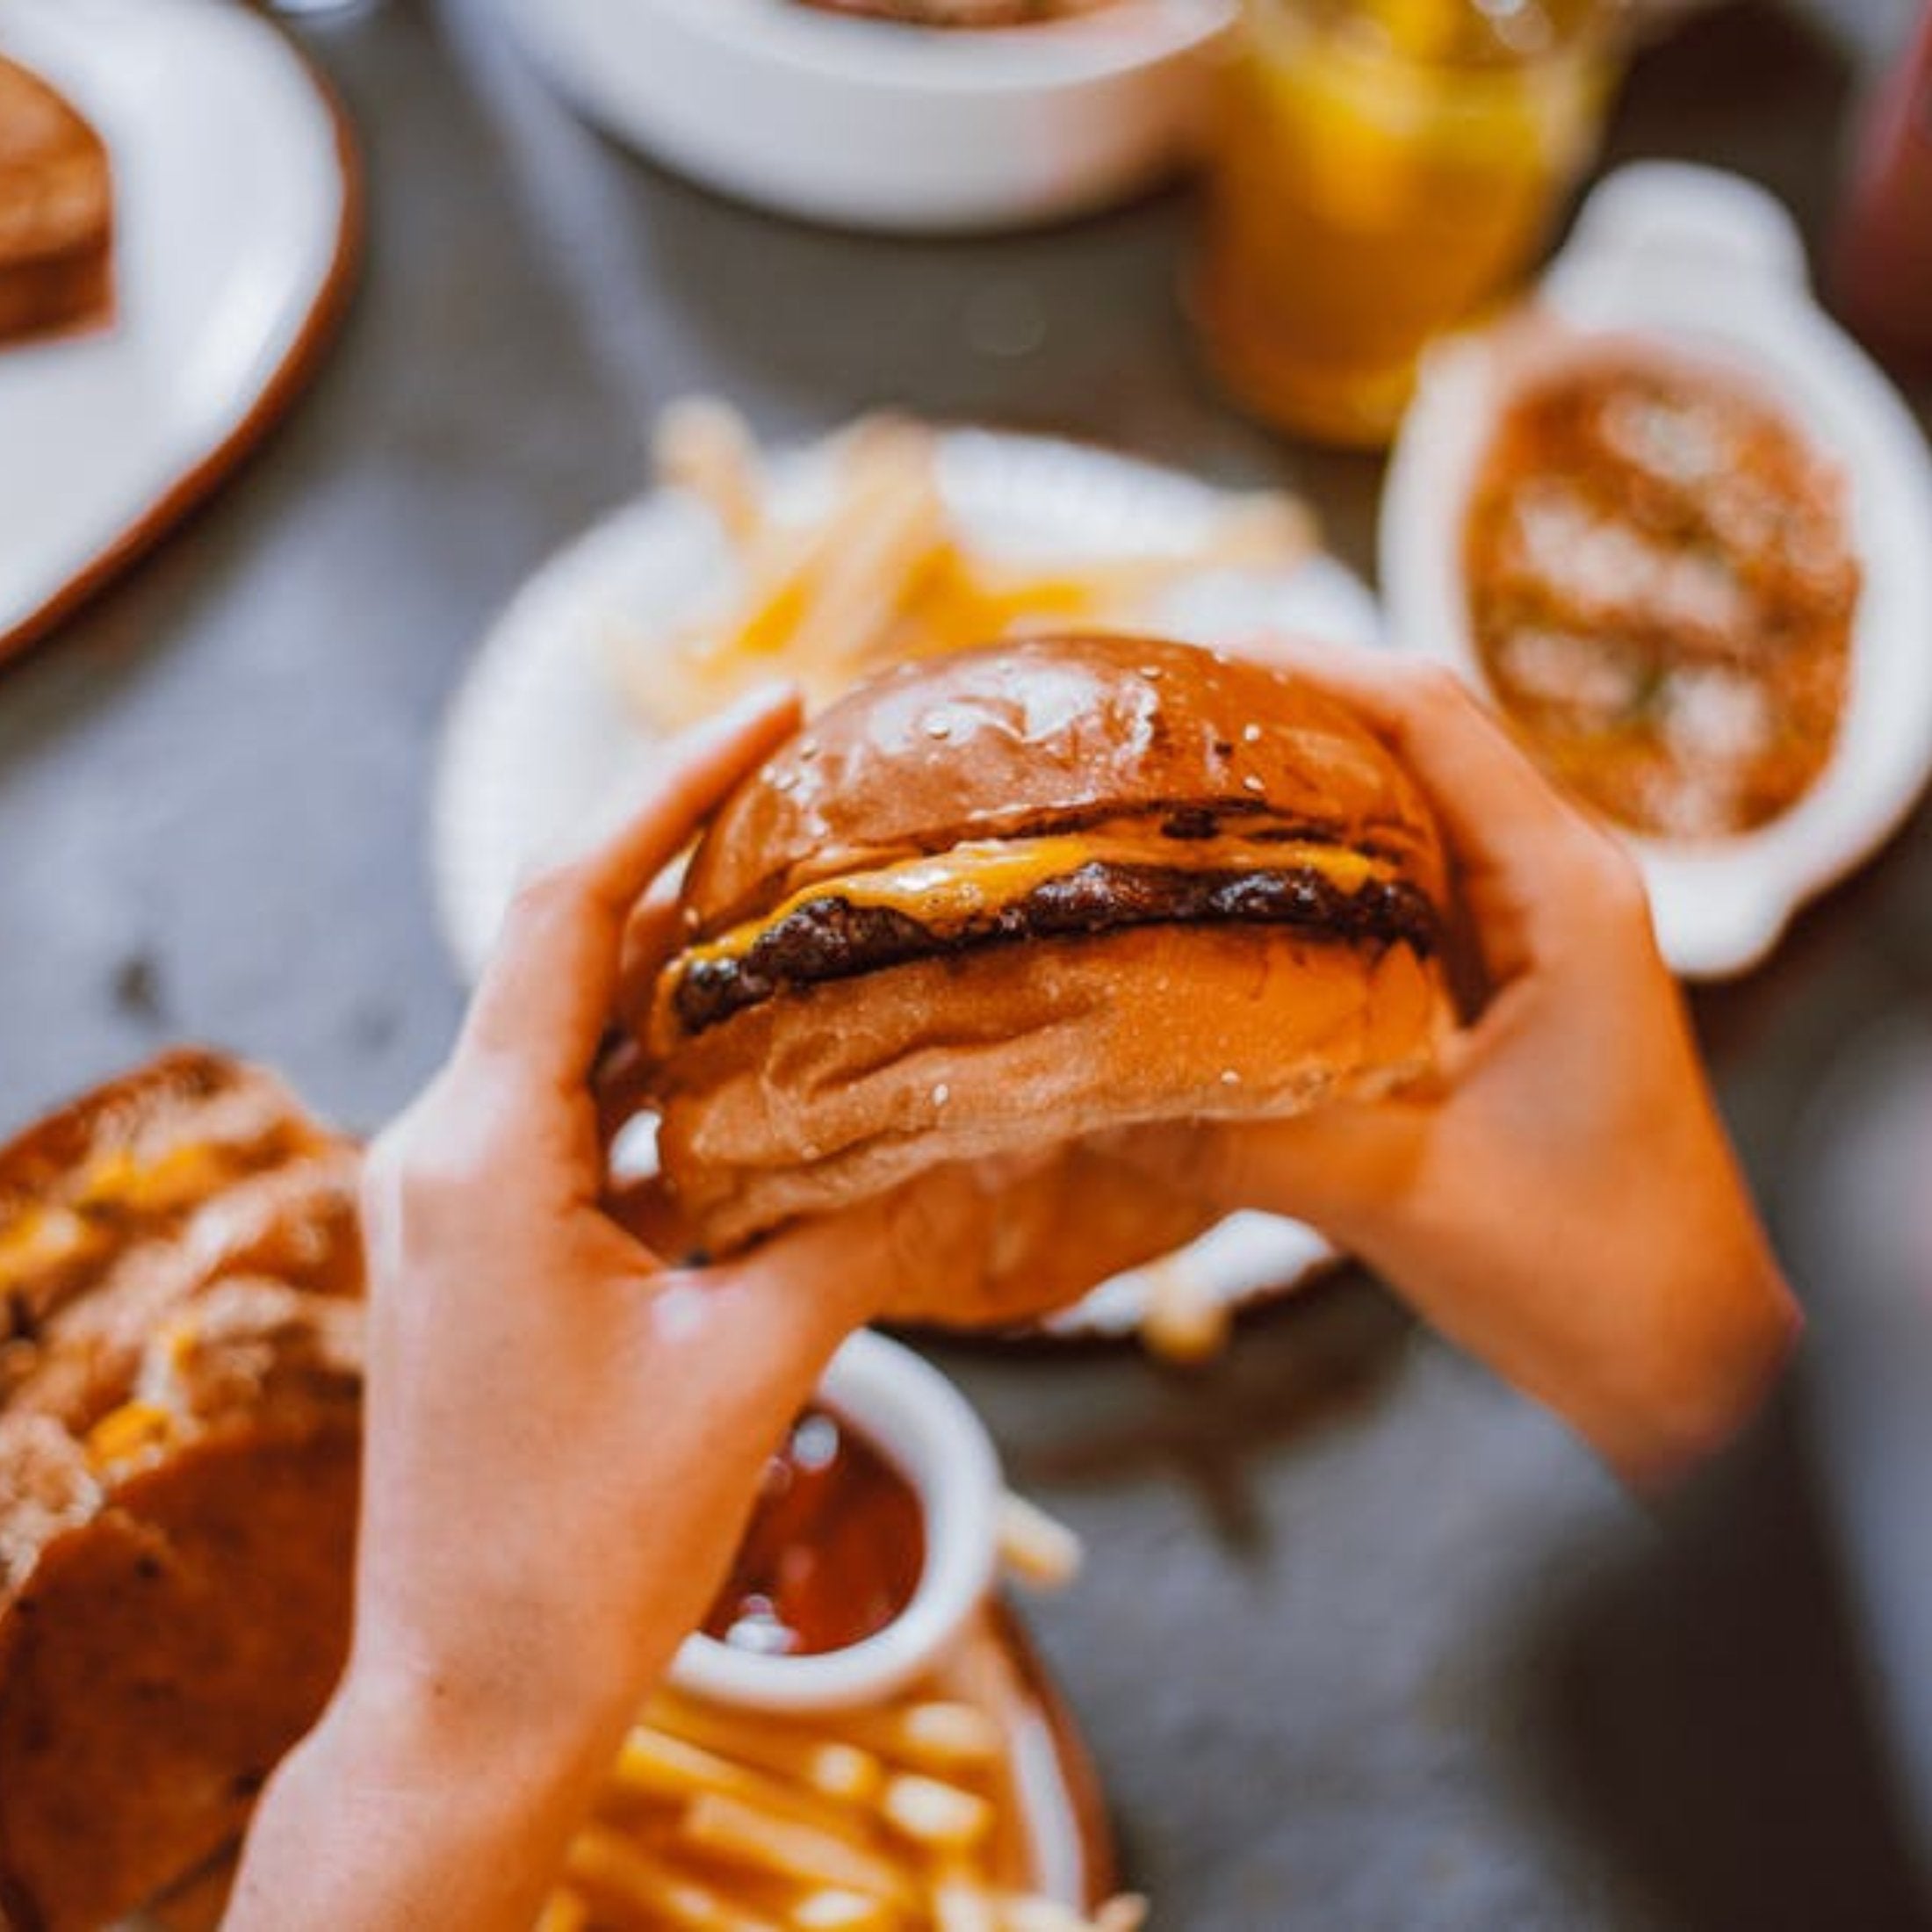 Two Hands holding a hamburger surrounded by sides